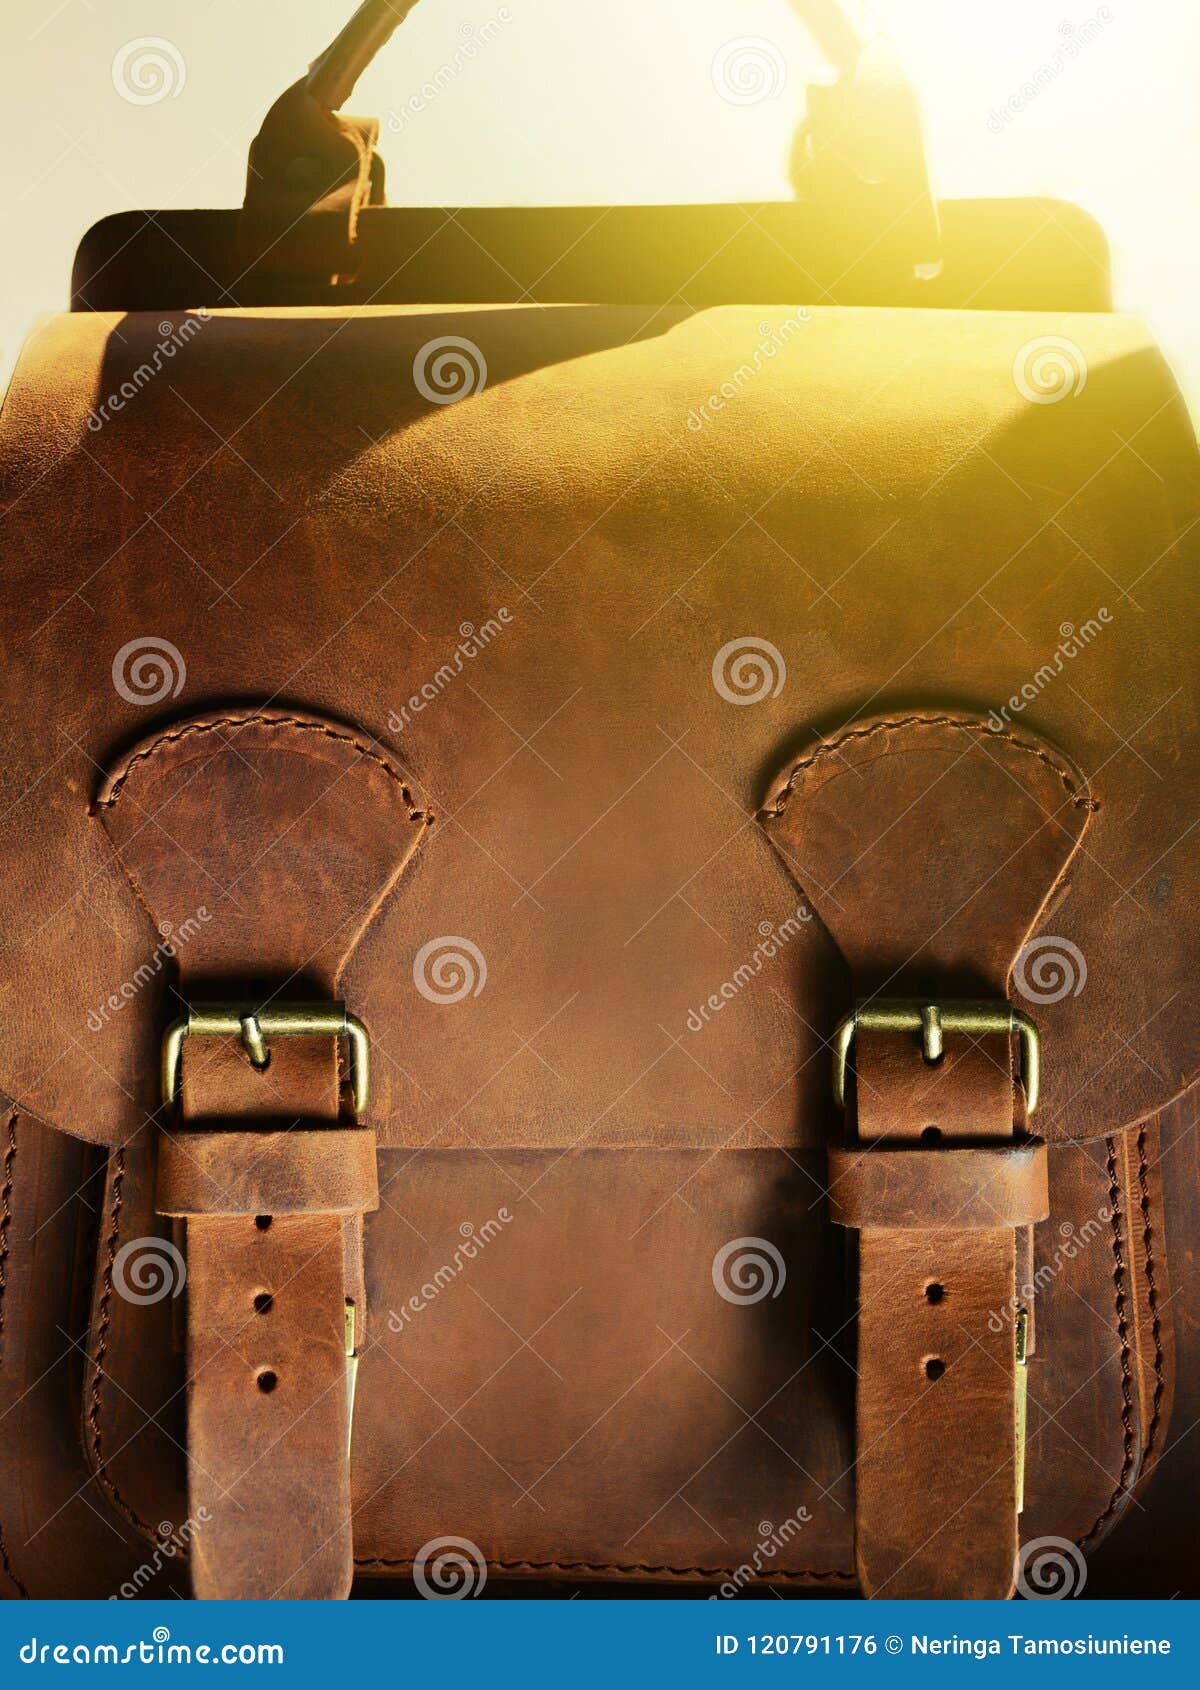 Vintage Natural Leather Backpack Closeup Stock Photo - Image of hipster ...